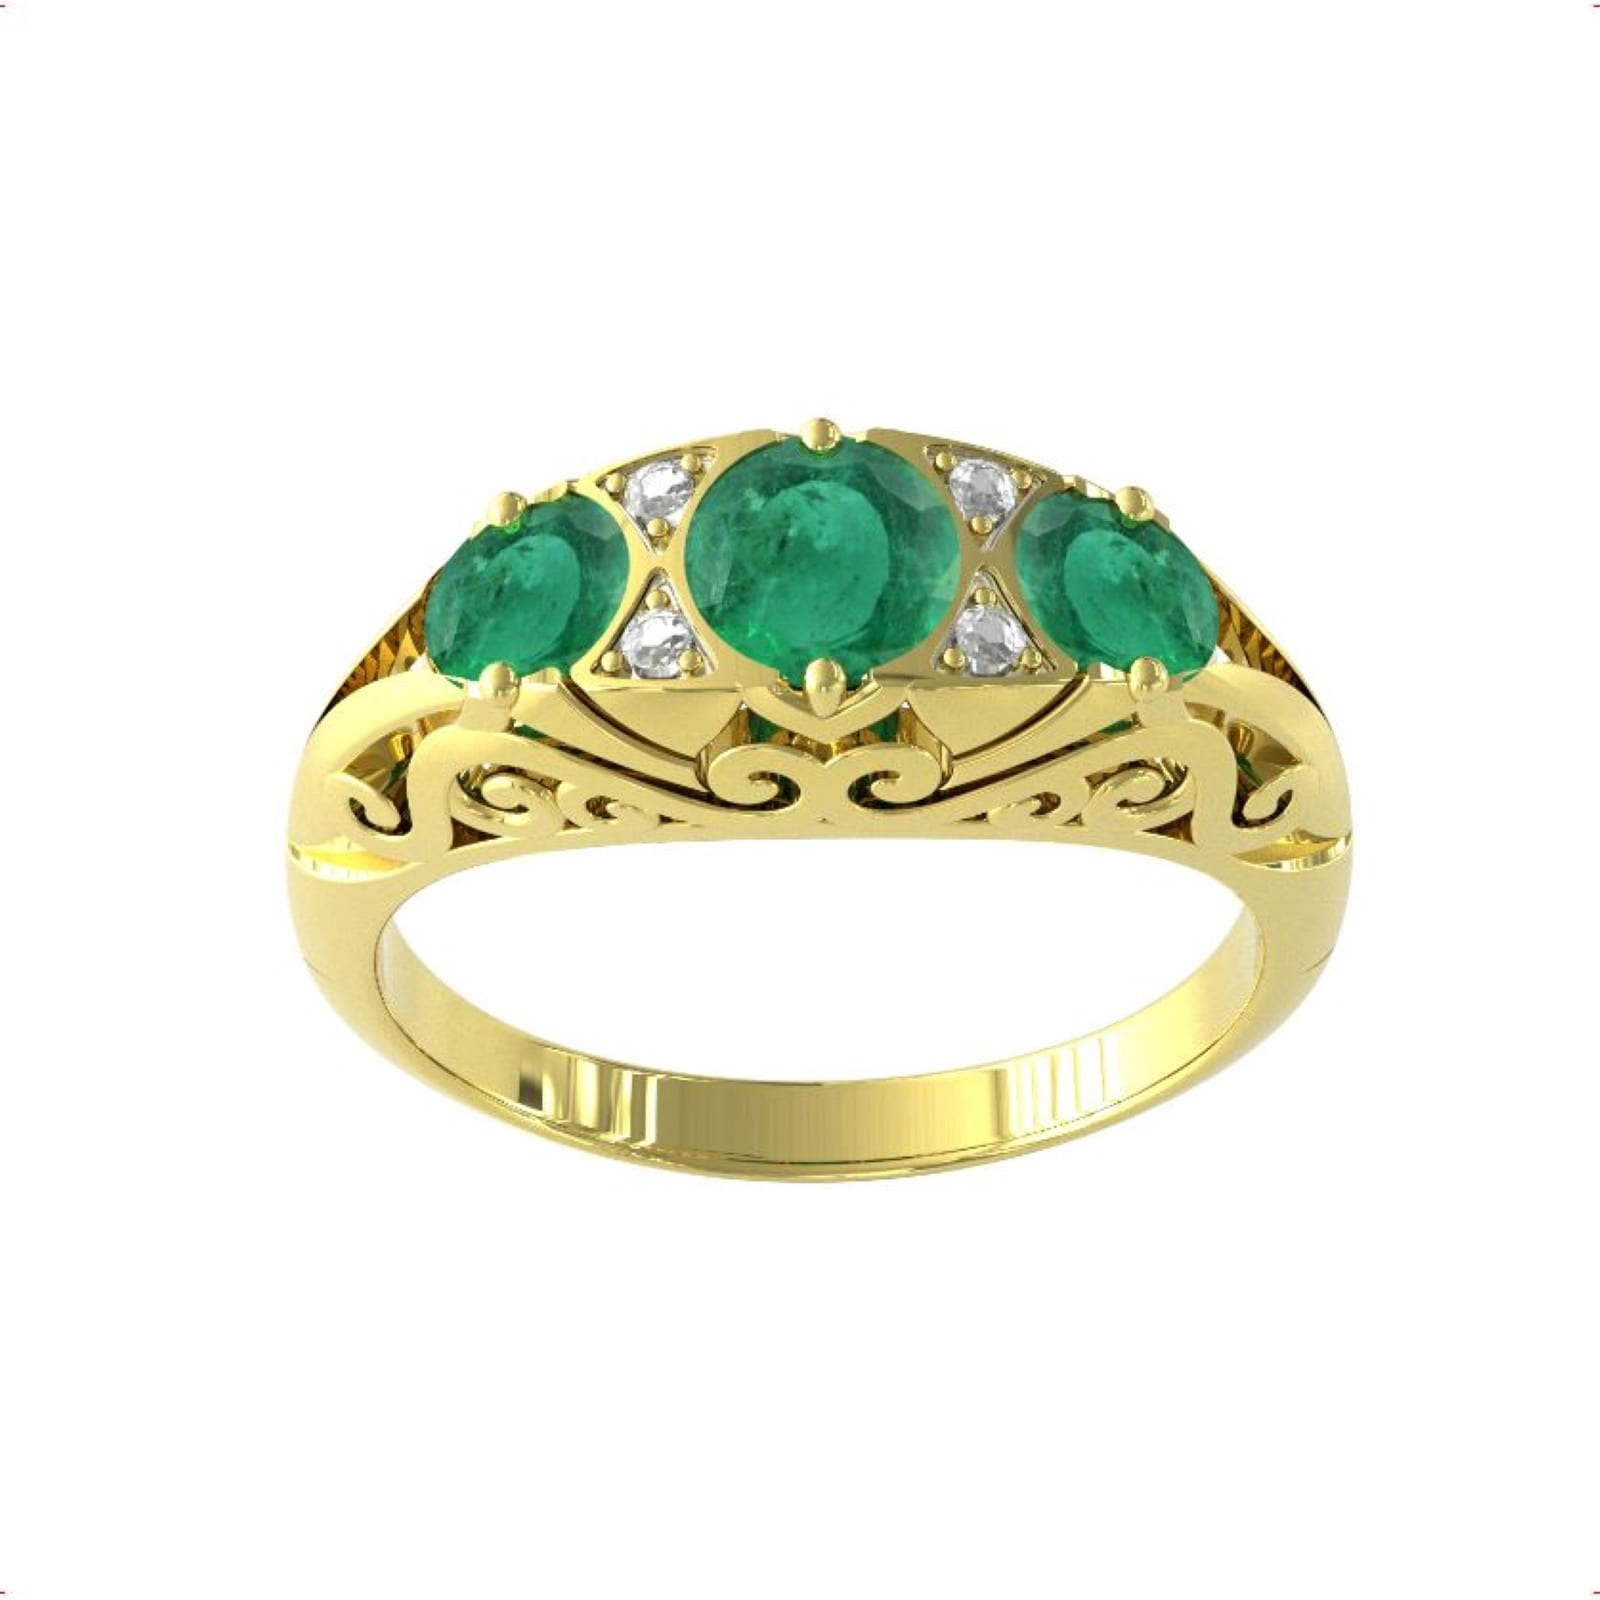 9ct Yellow Gold Victorian Style 3 Stone Emerald & Diamond Ring - Ring Size A.5